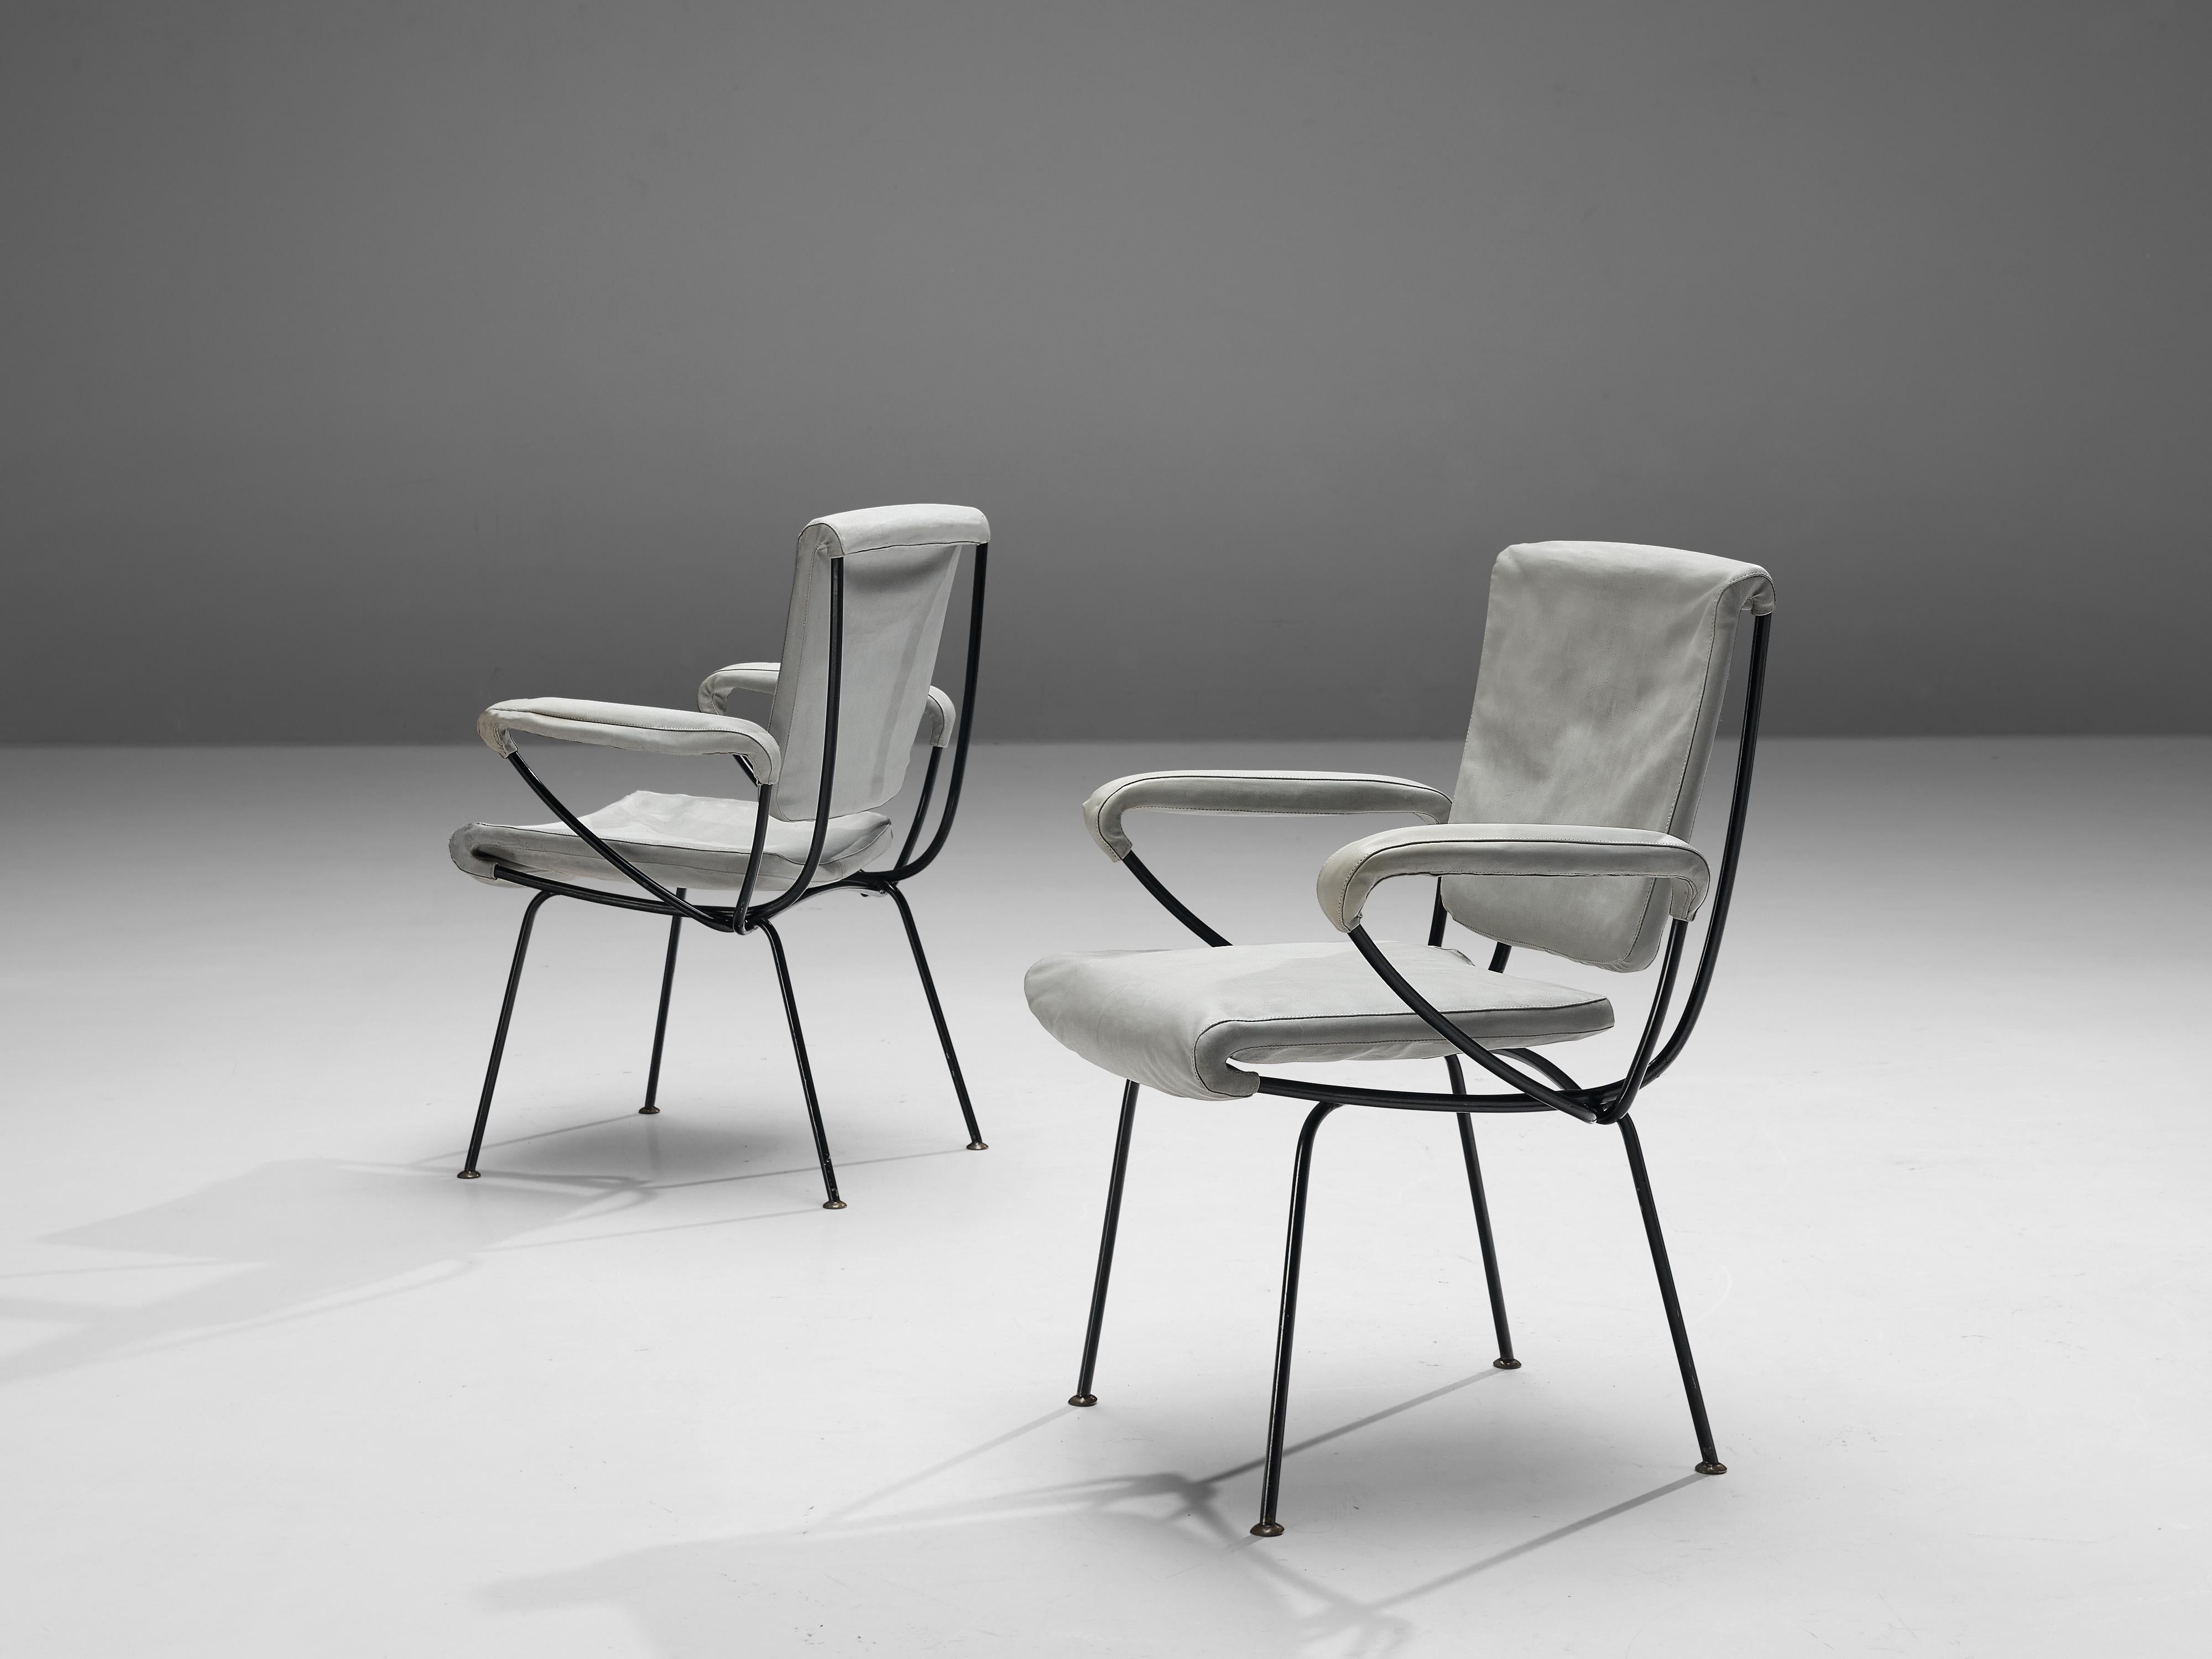 Gastone Rinaldi for Rima, pair of armchairs, model 'DU 24', metal, leatherette, Italy, 1956

These Italian postwar armchairs have a sculptural appearance due to the well-constructed tubular frame in metal. The style is simple and understated, where